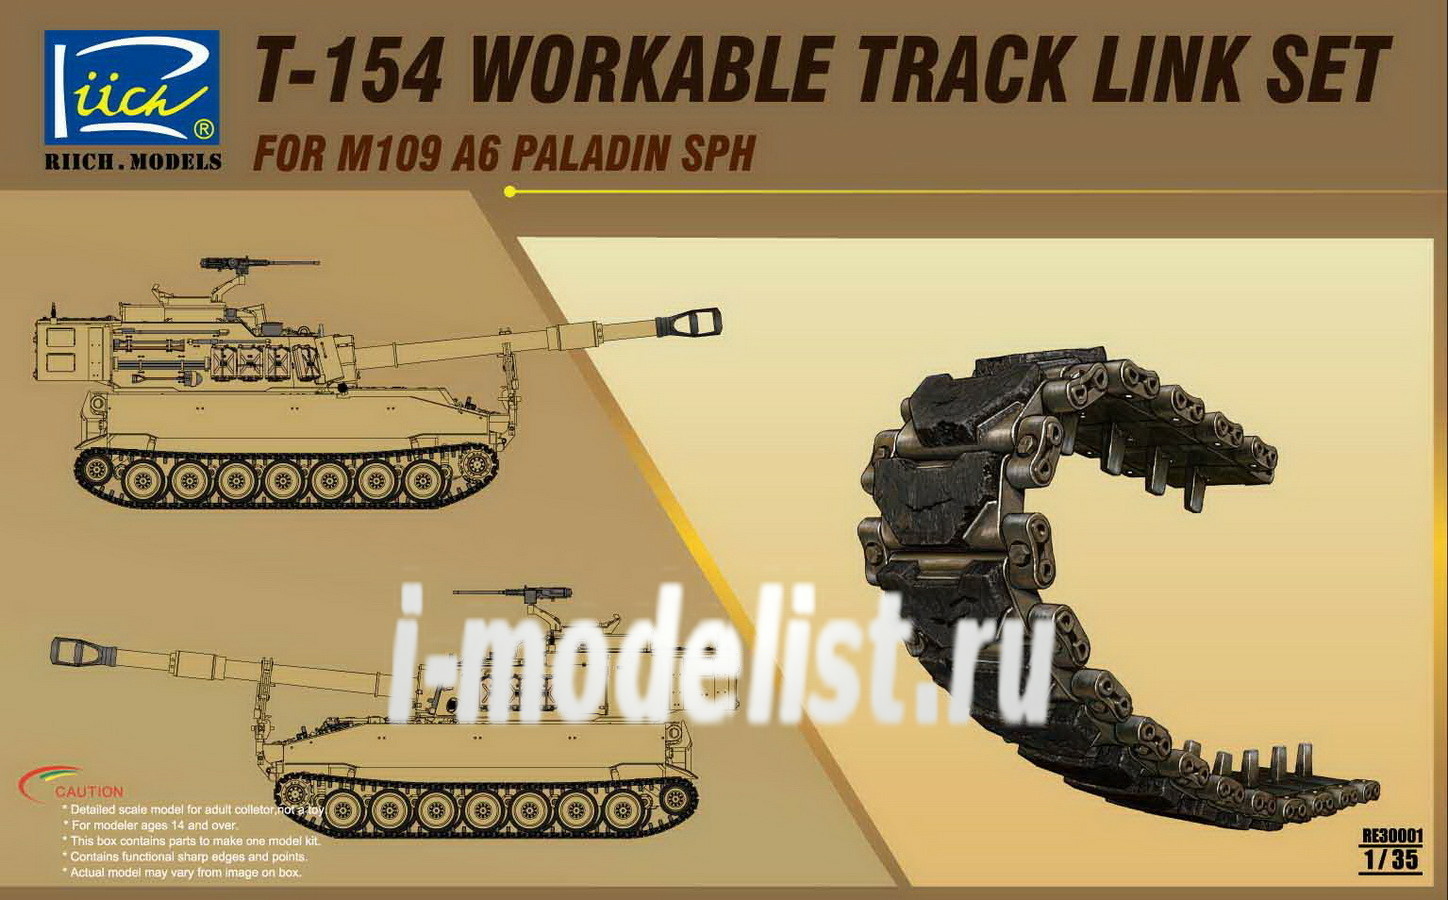 RE30001 Riich 1/35 Set of tracks for set in working track on fingers for M109A6 Paladin (T-154 type)